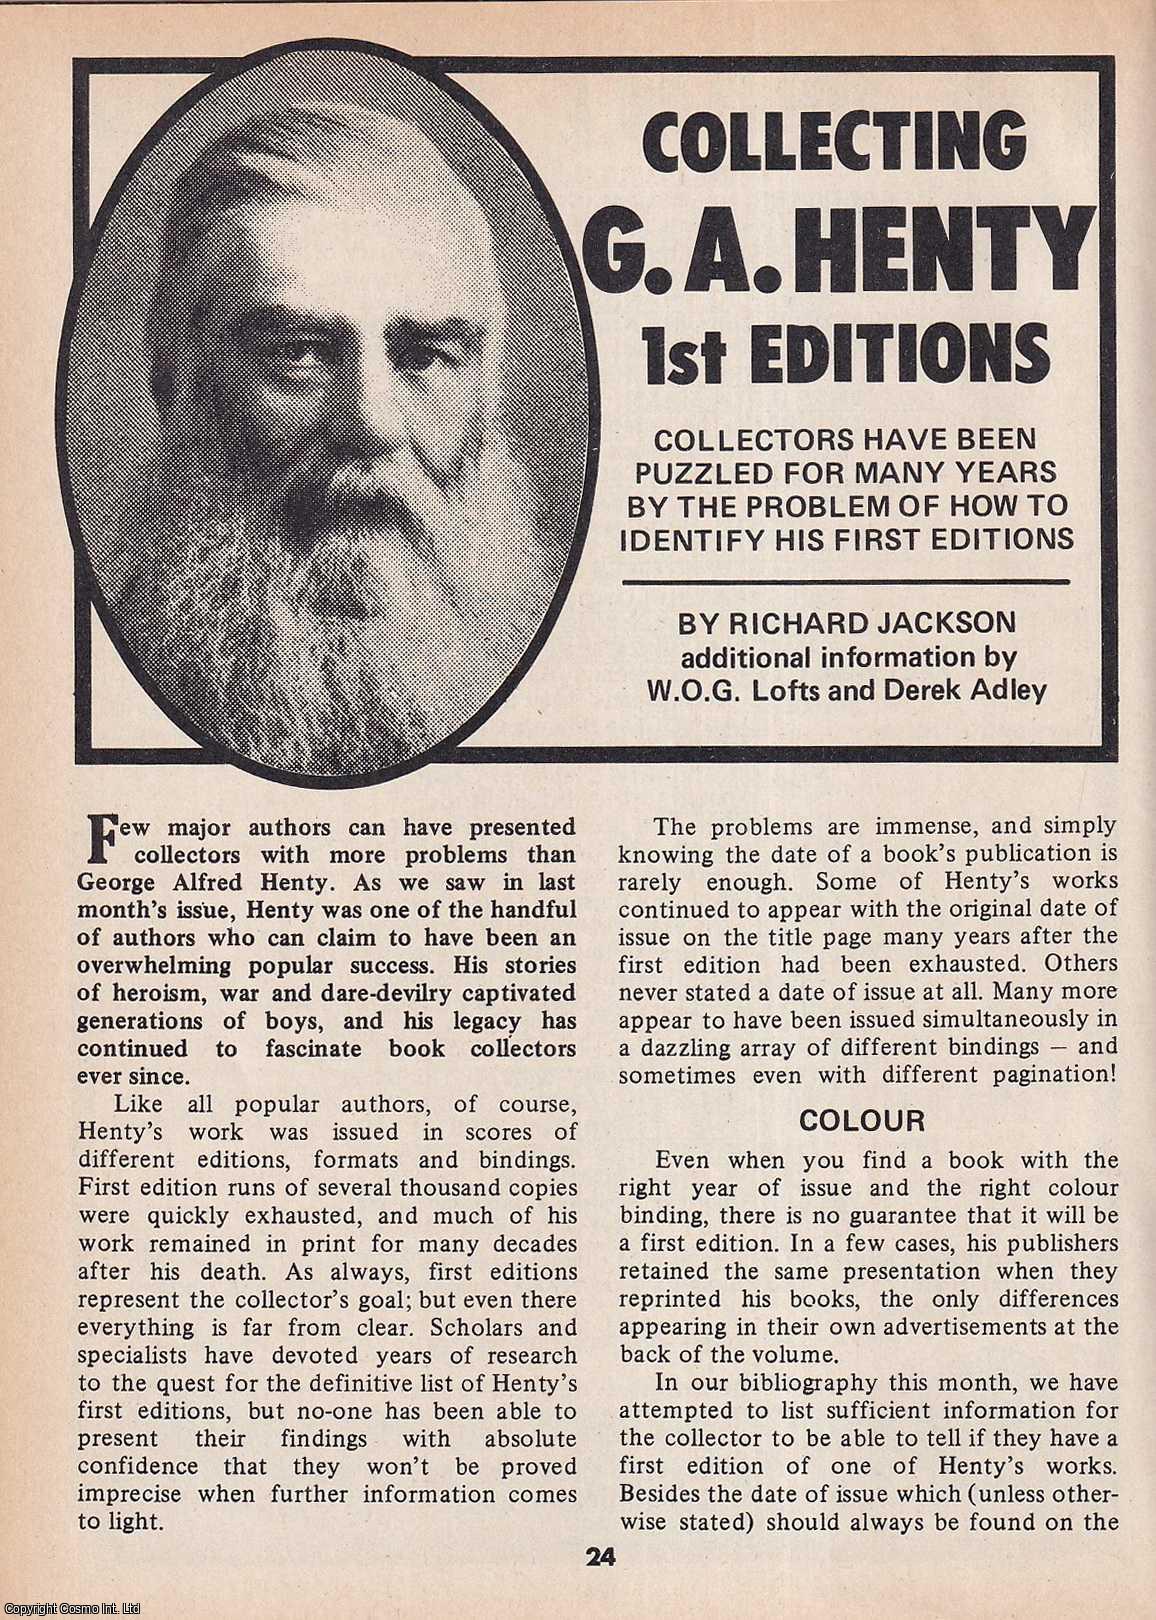 Richard Jackson - Collecting G. A. Henty 1st Editions. This is an original article separated from an issue of The Book & Magazine Collector publication.